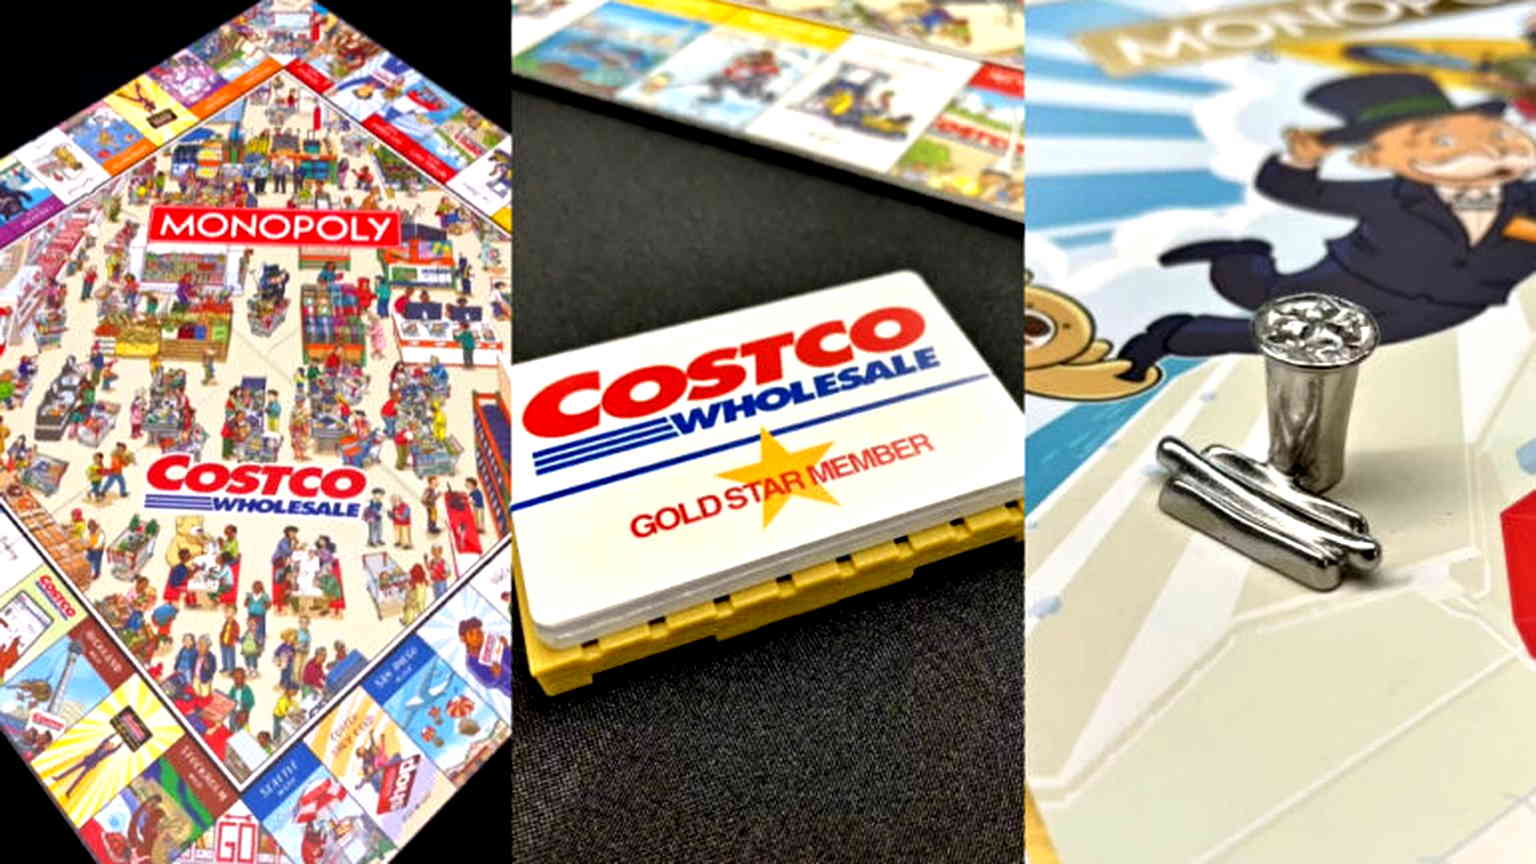 Costco releases exclusive Monopoly game in celebration of its 40th anniversary